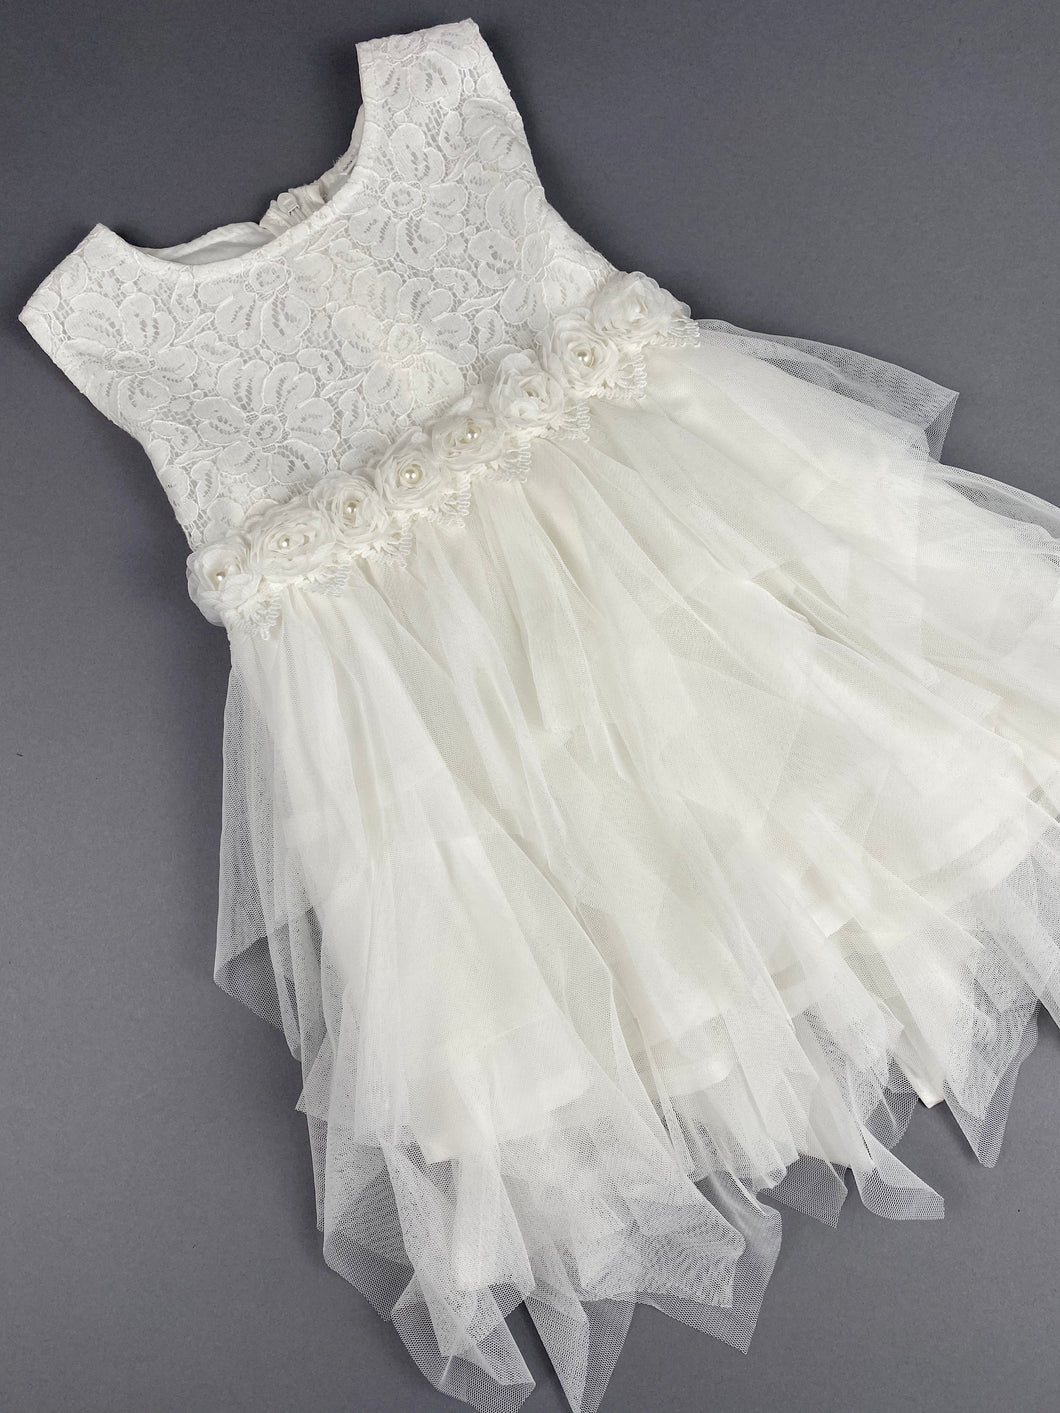 Girls Christening Baptismal Dress 43 with Lace Top and Pearl Rosette Belt